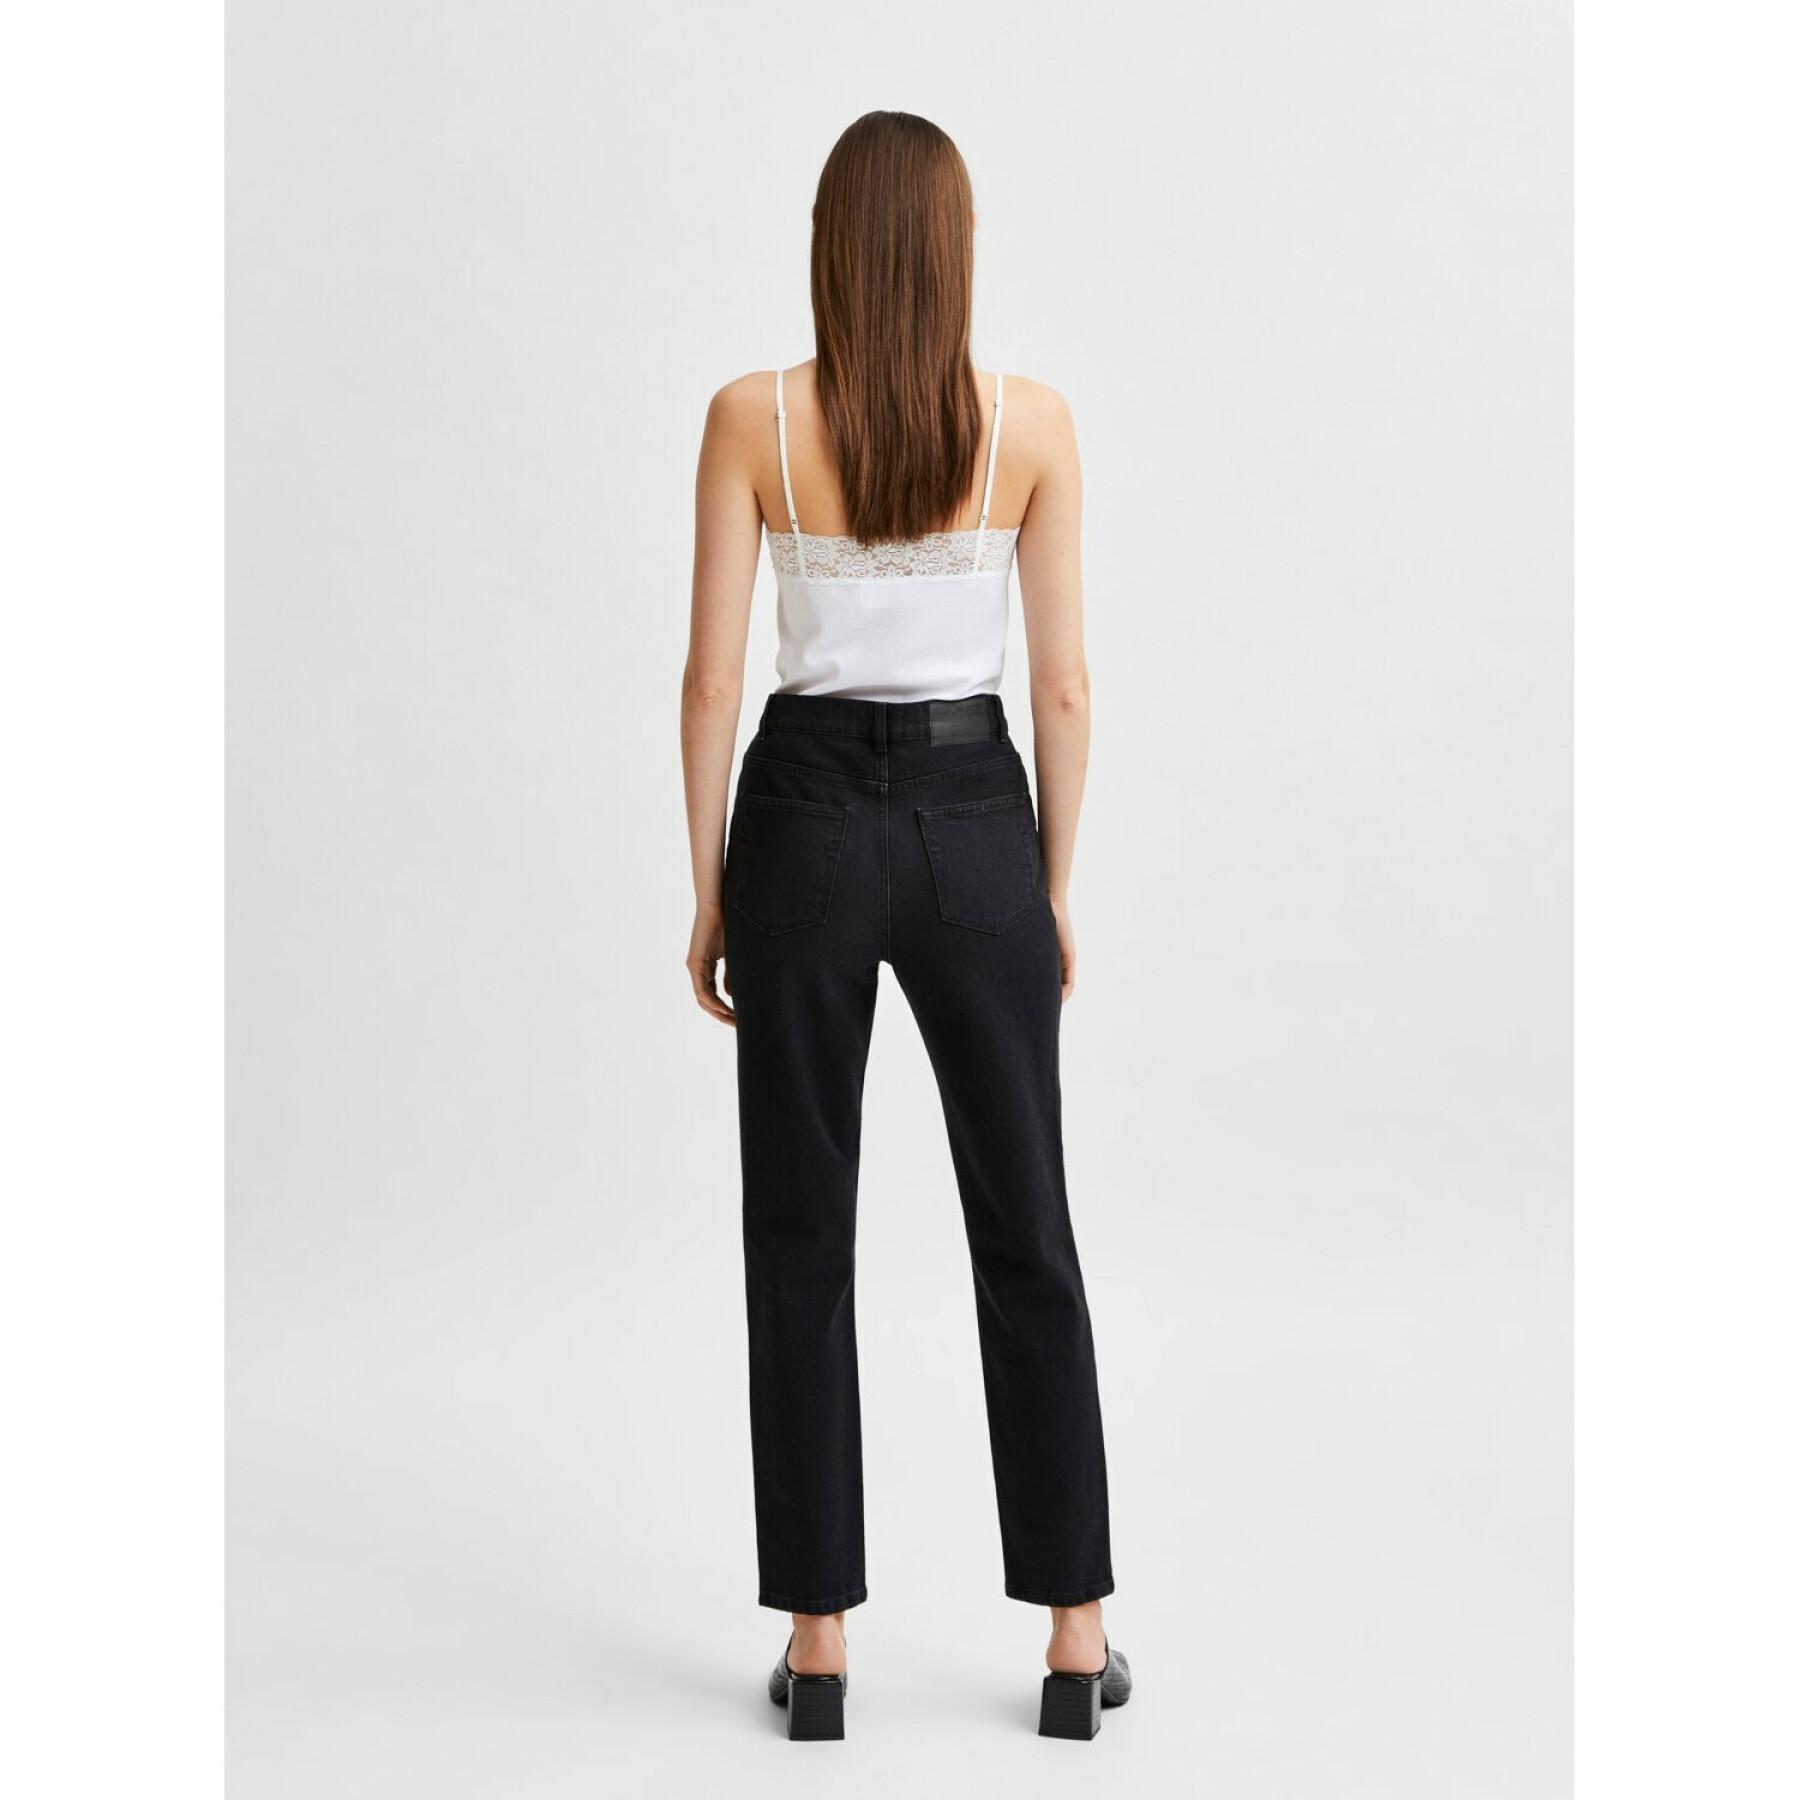 Damen-Jeans mit hoher Taille Selected Amy beauty